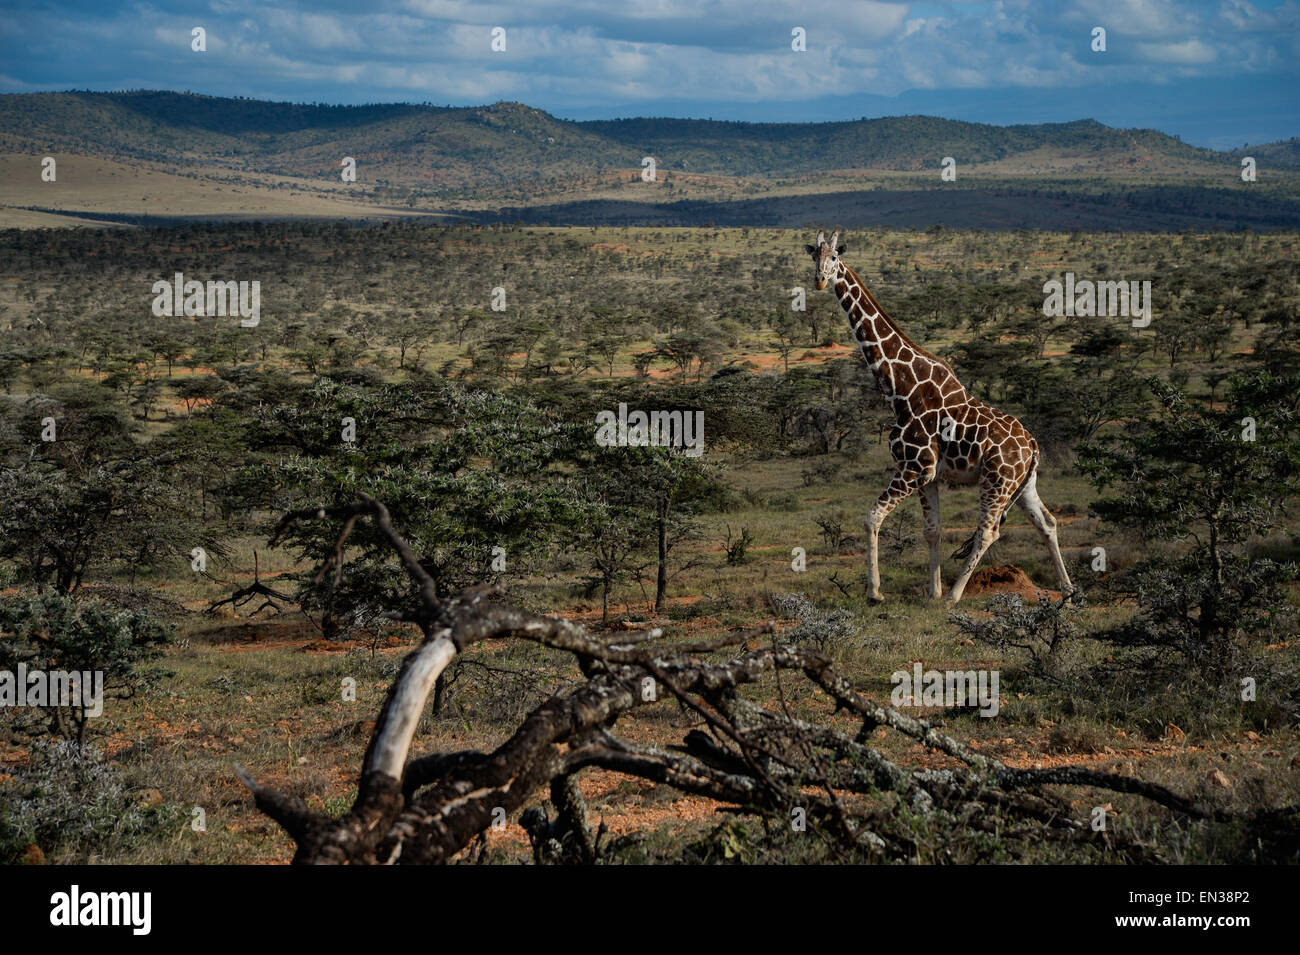 The reticulated giraffe also known as the Somali giraffe, is native to Somalia, southern Ethiopia, and northern Kenya. Stock Photo